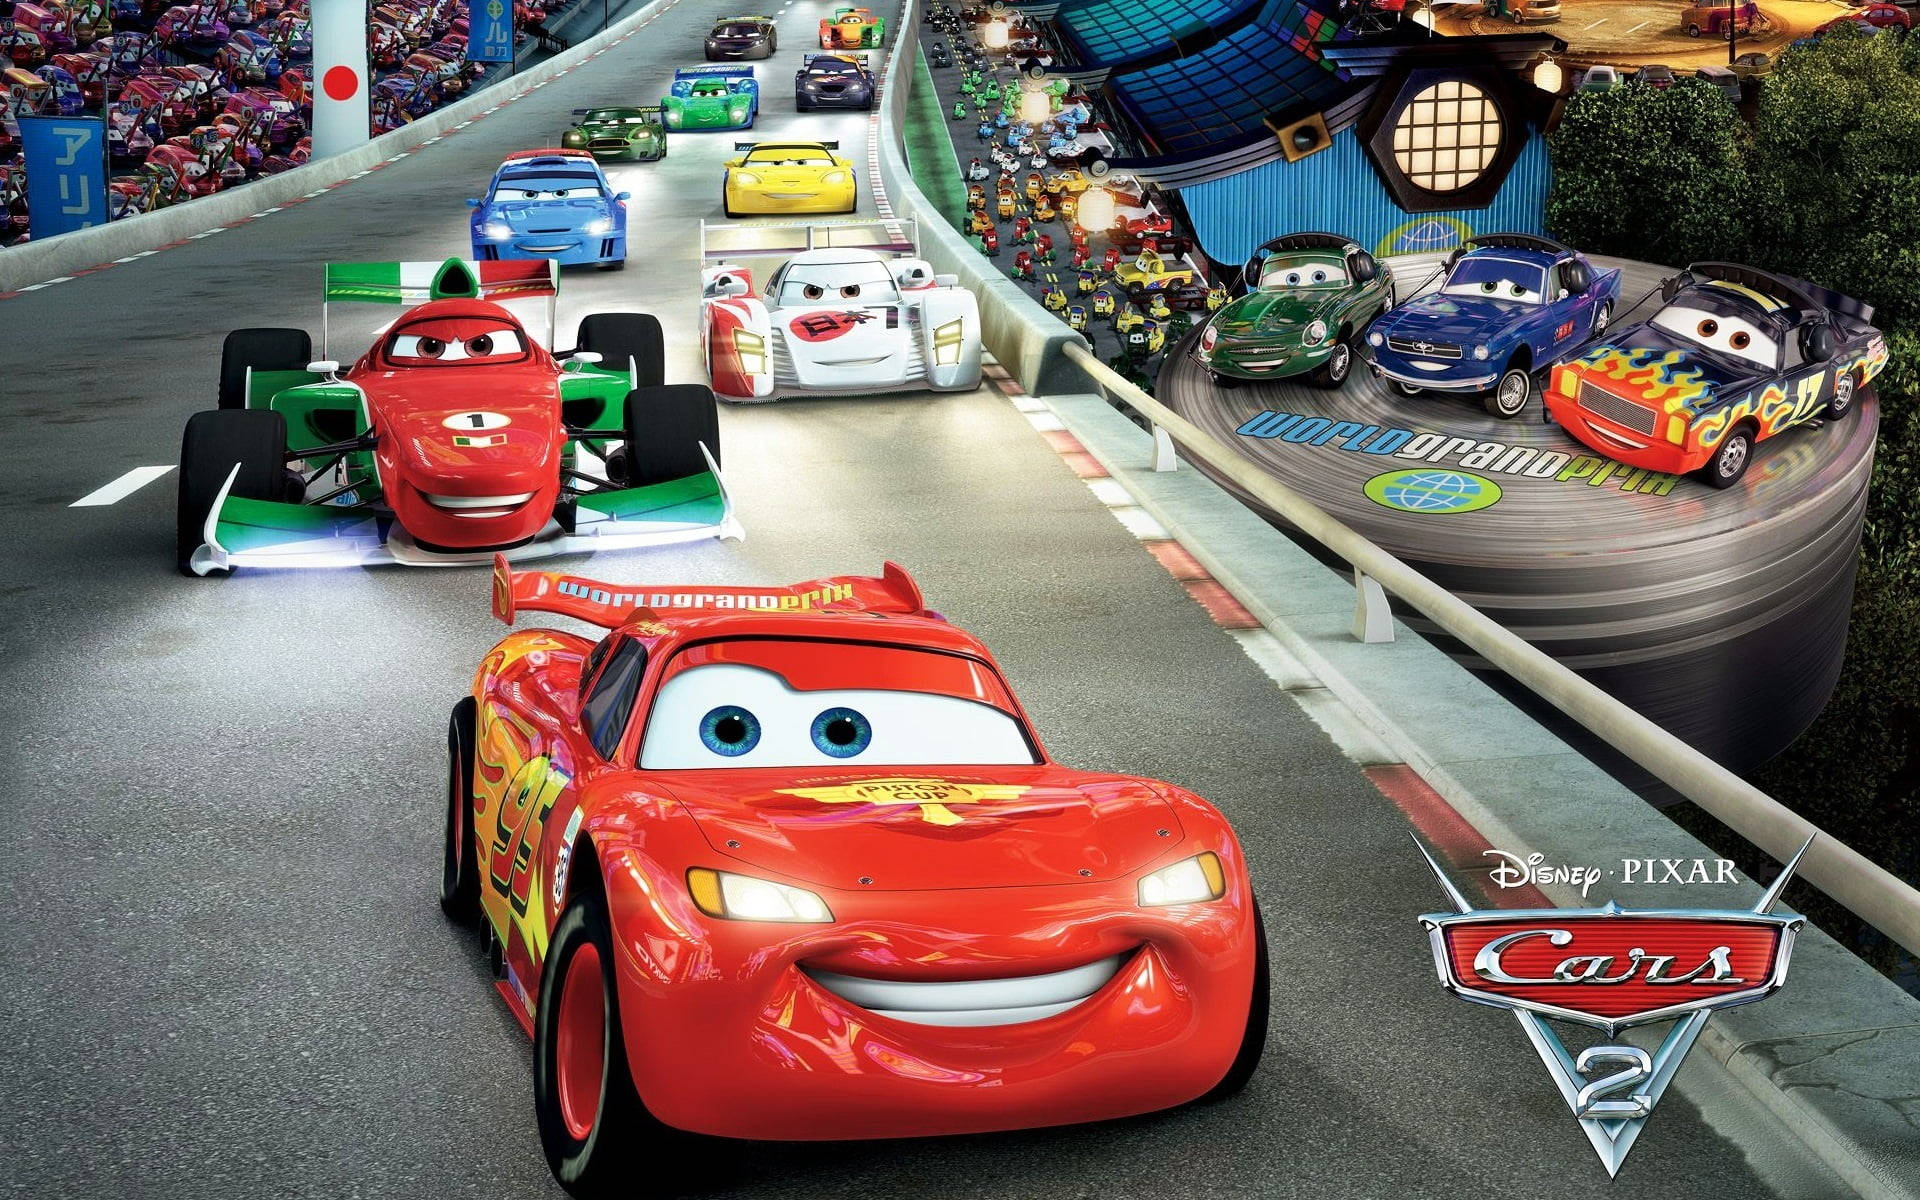 Exciting Line-up Of Racers At The World Grand Prix In Cars 2